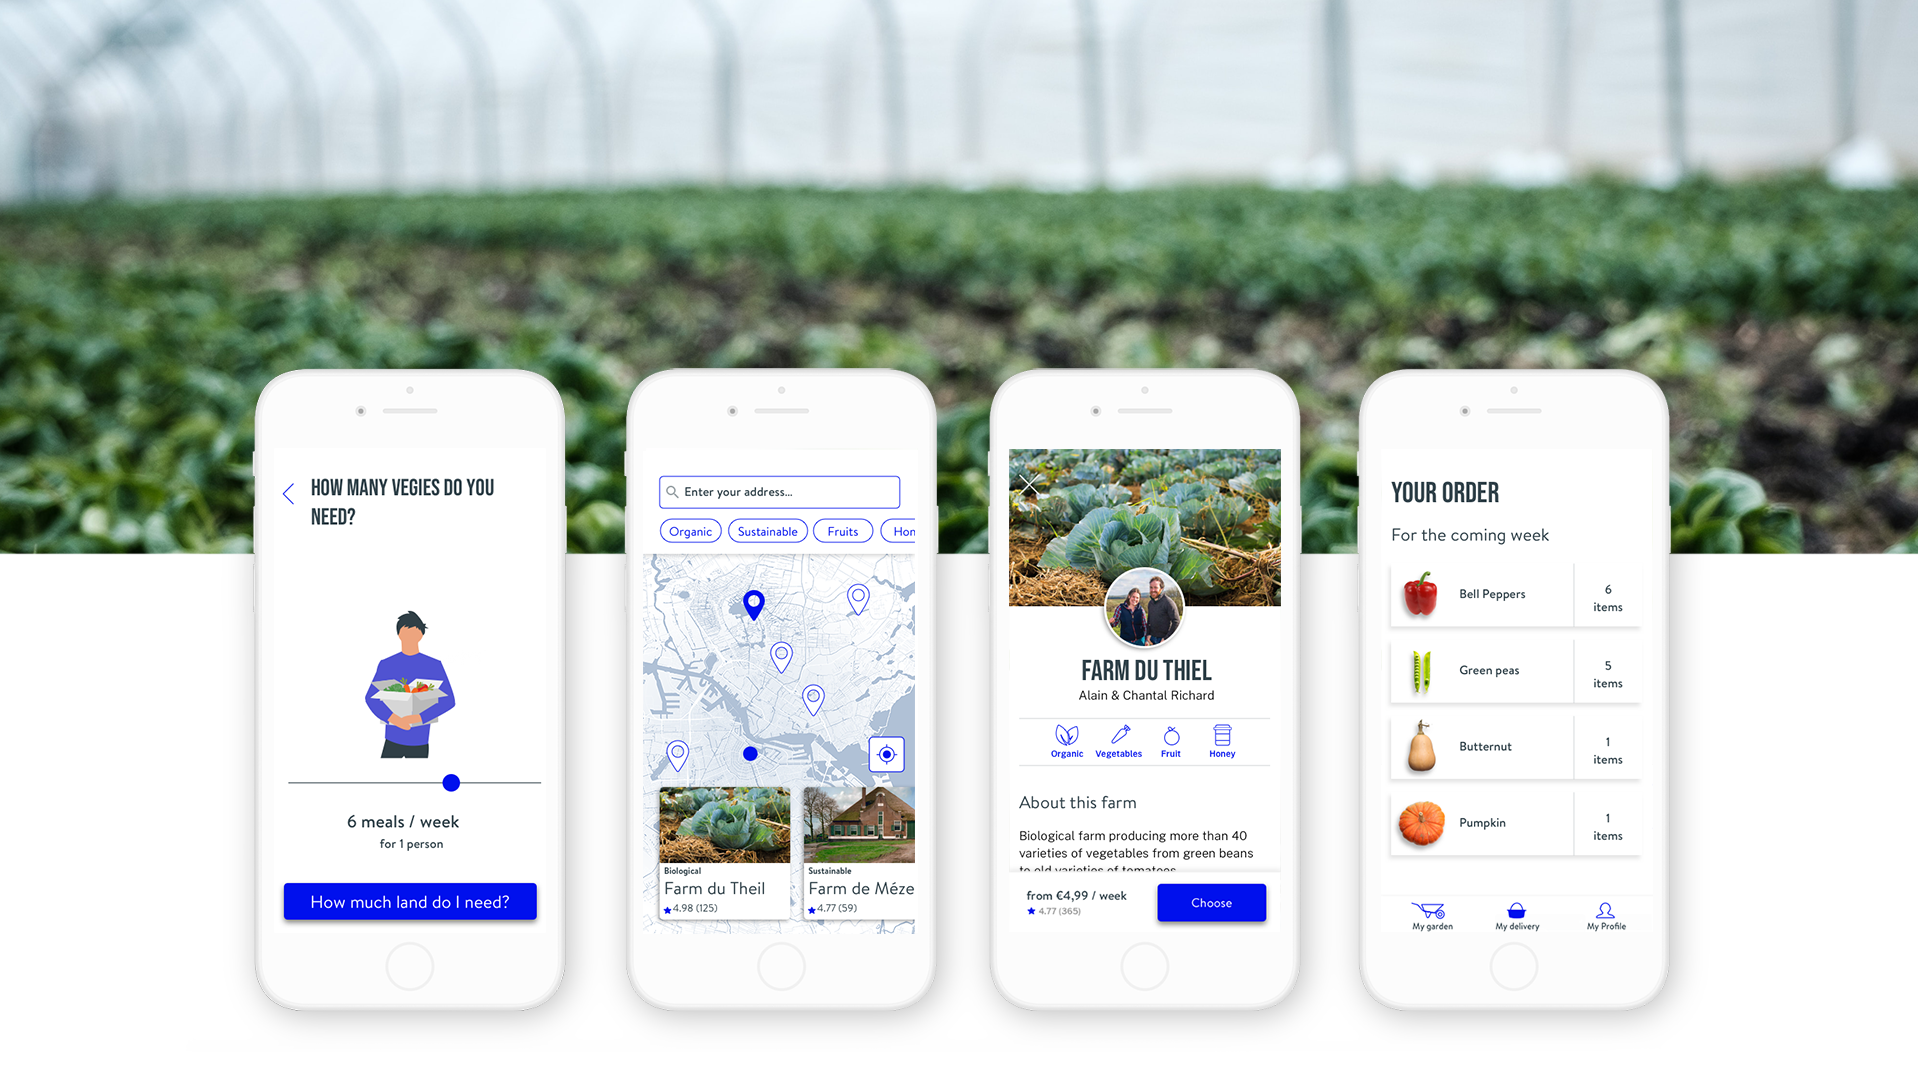 How to Design an App to Support Local Farmers — Grow It, a UX Case Study |  by Antoine Fourrier | UX Collective